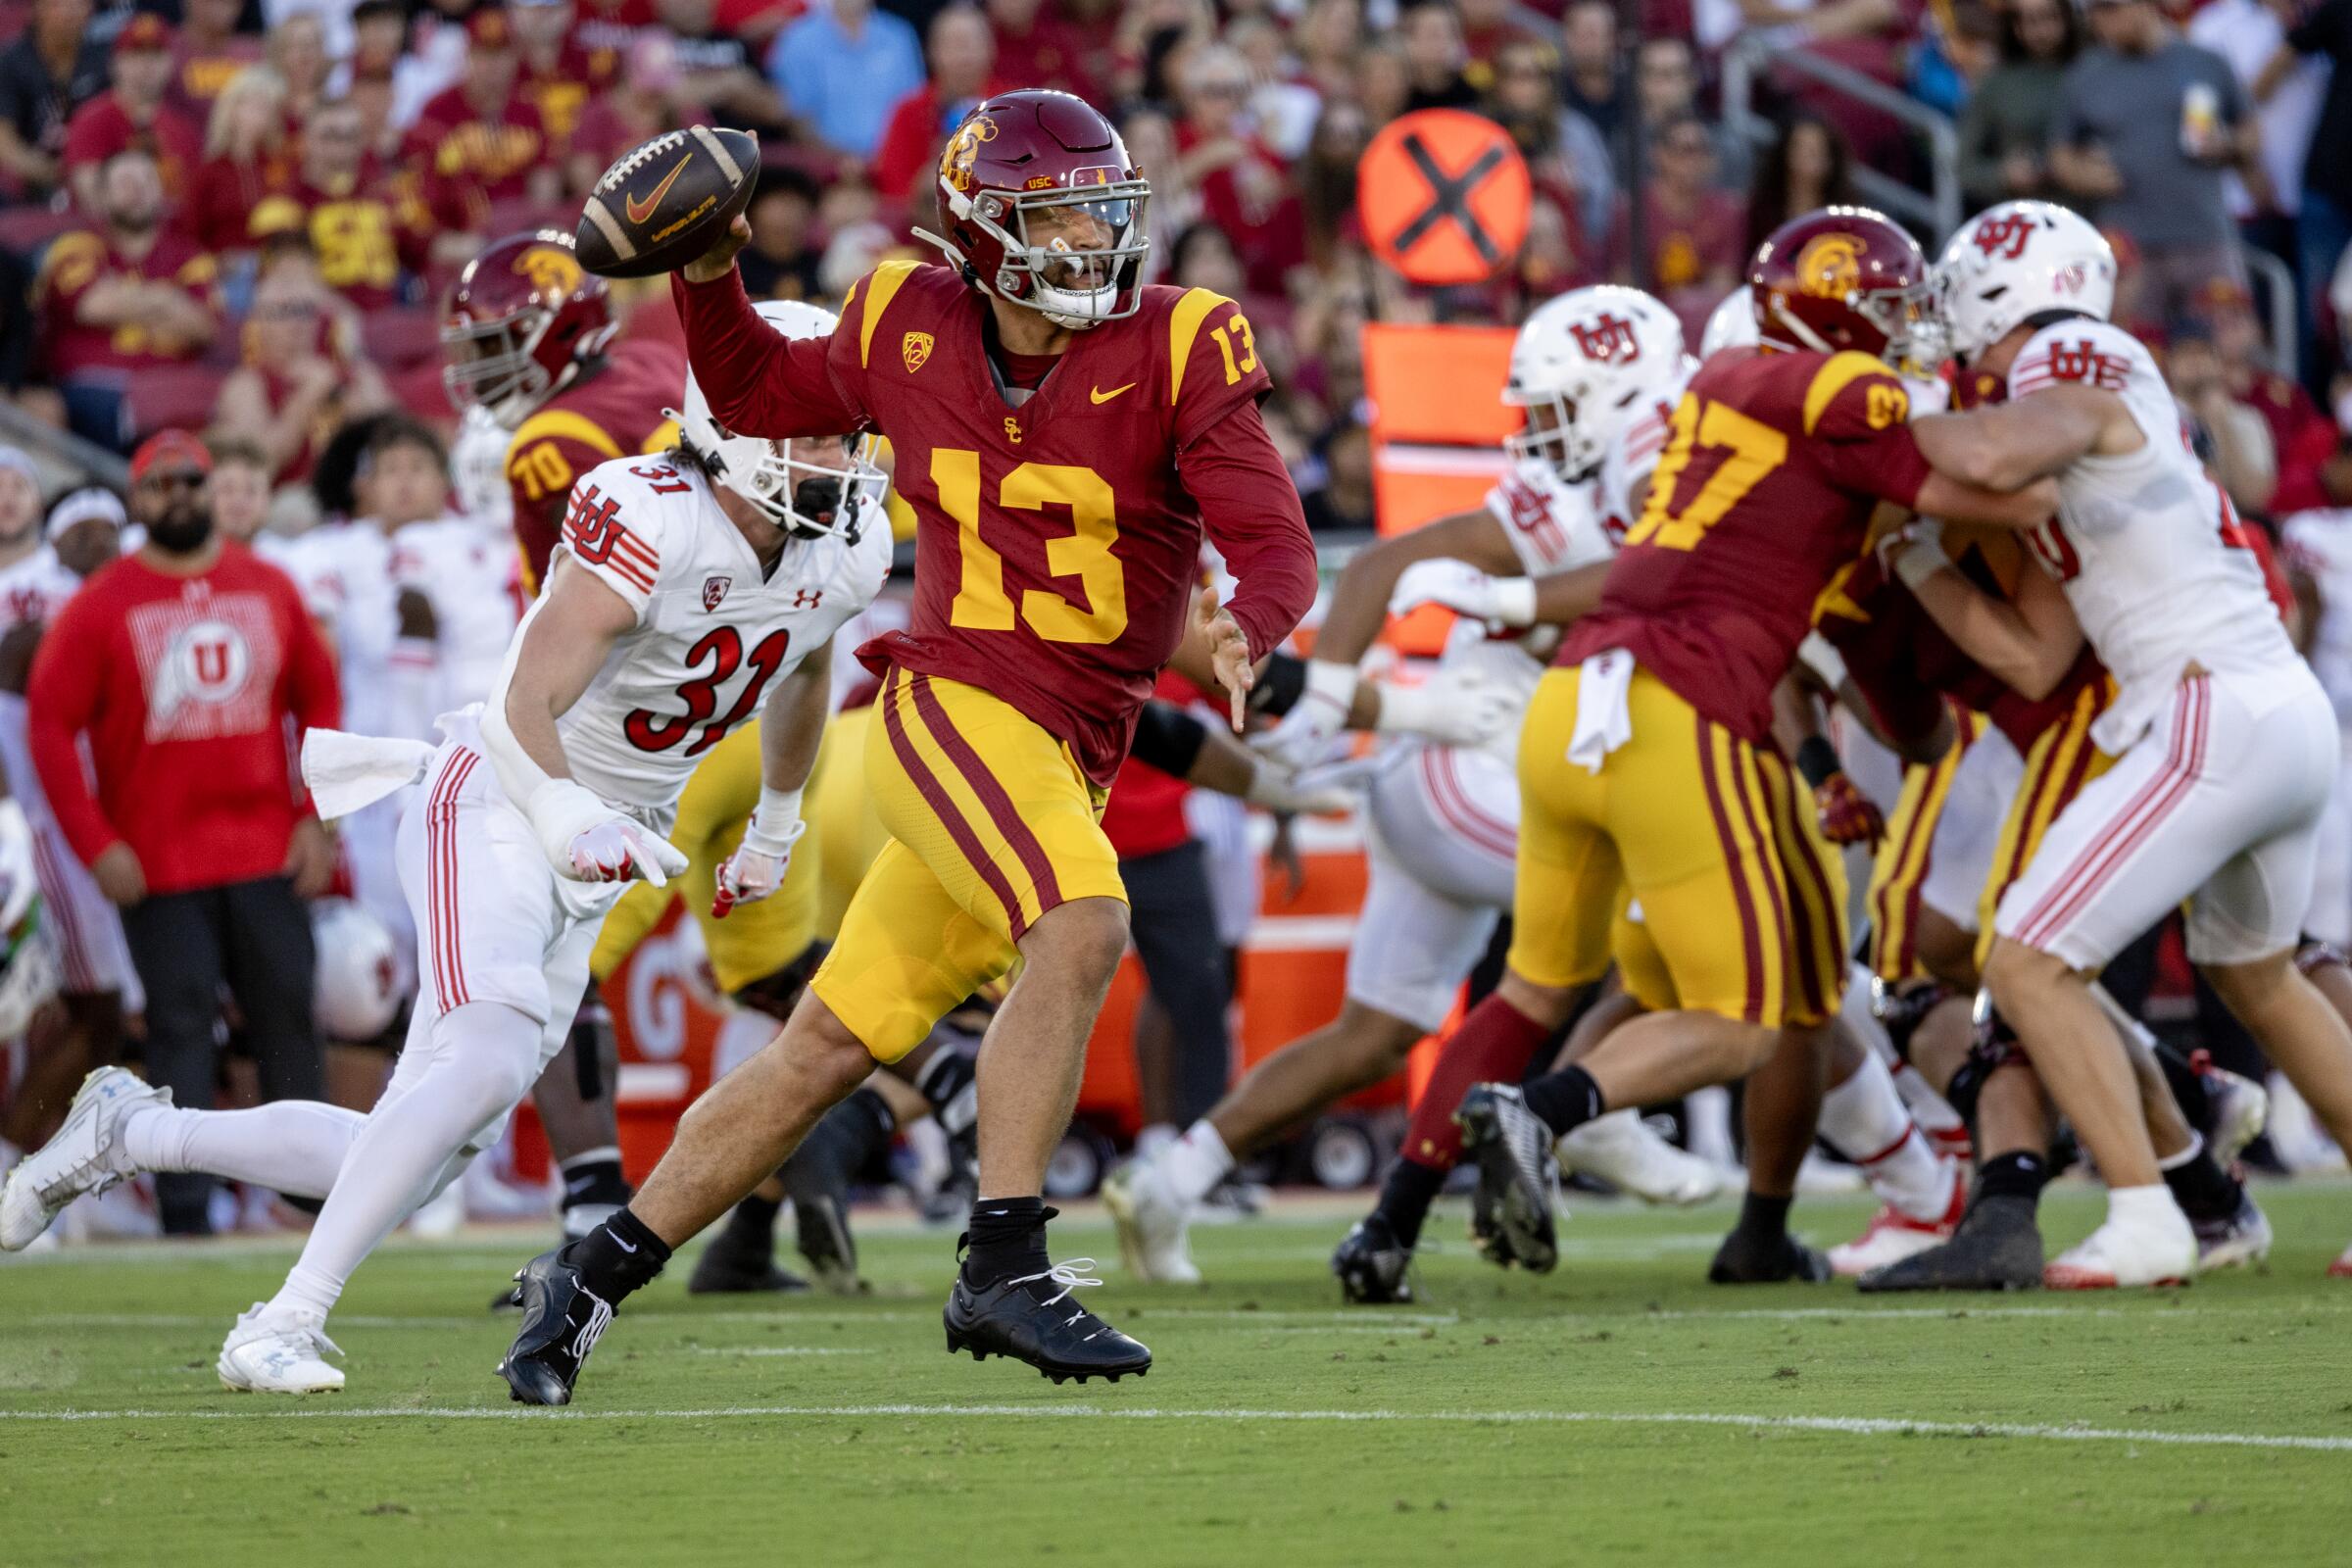 USC quarterback Caleb Williams looks to pass during a loss to Utah at the Coliseum on Oct. 21.